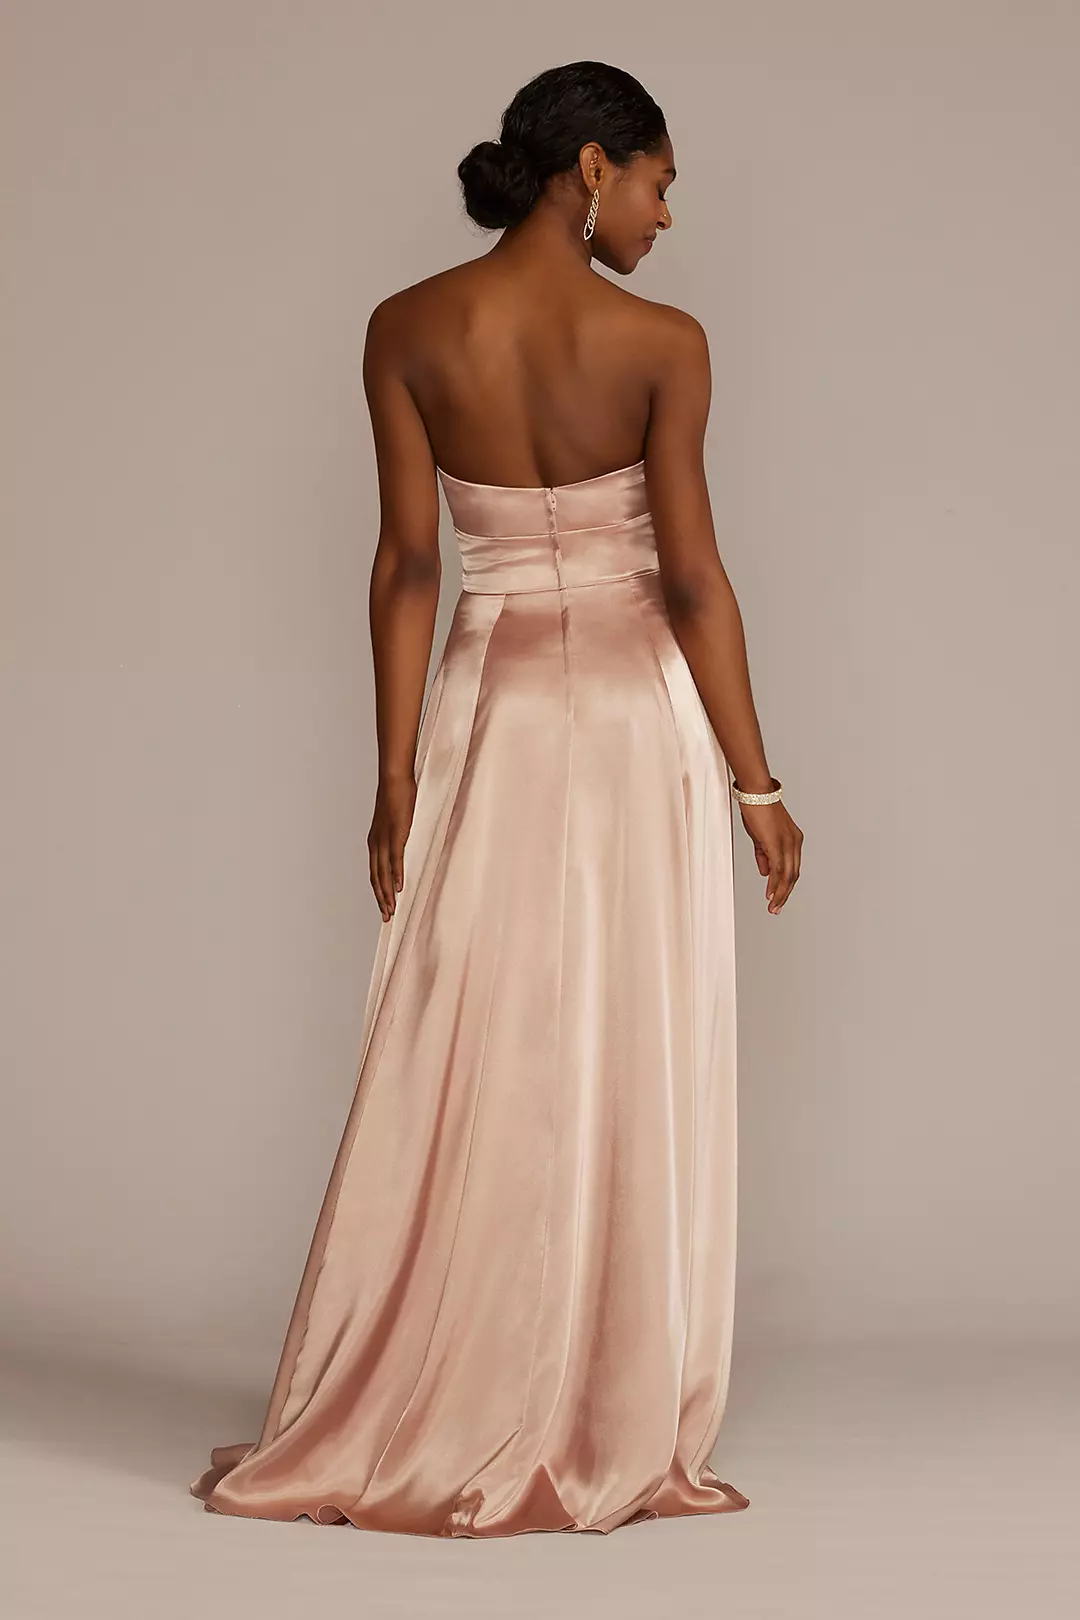 Charmeuse Strapless A-Line Bridesmaid Dress Image 2